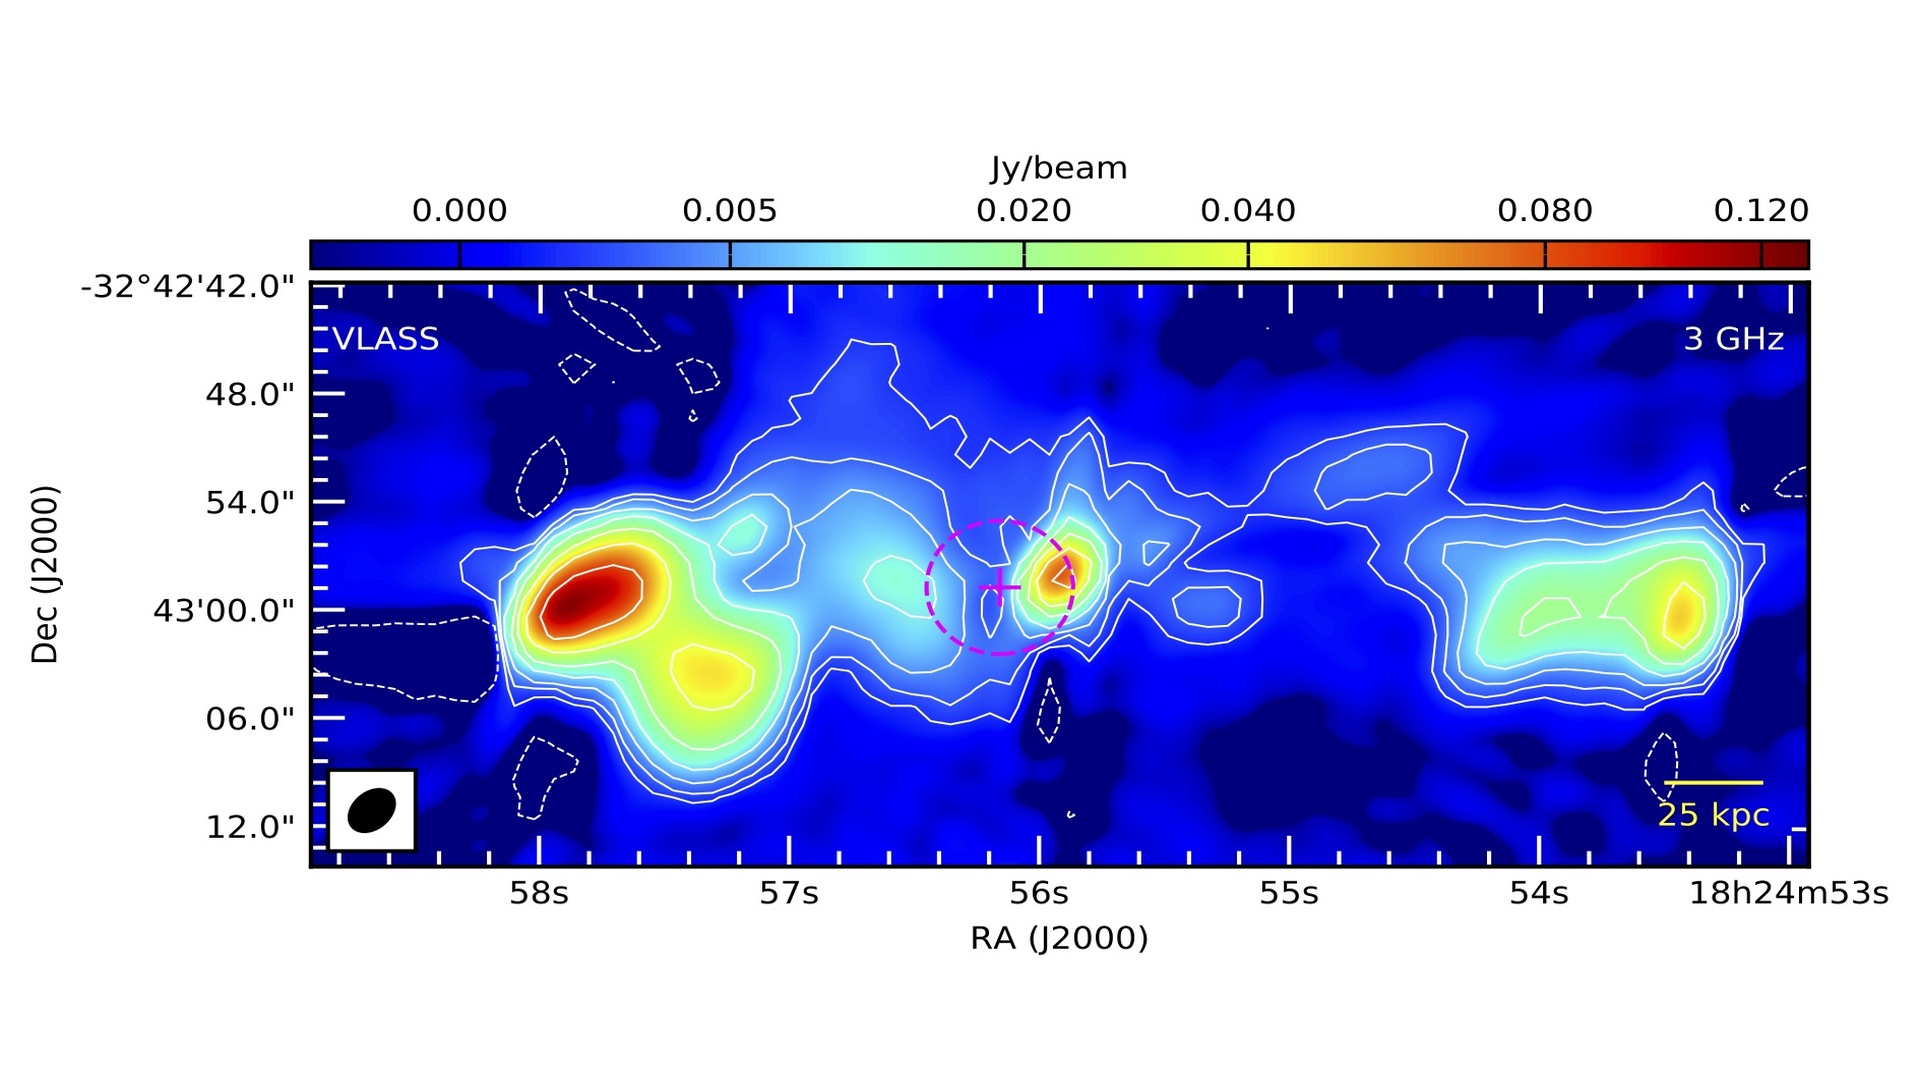 ASI - The emerging population of radio galaxies in the gamma-ray sky of INTEGRAL and Fermi